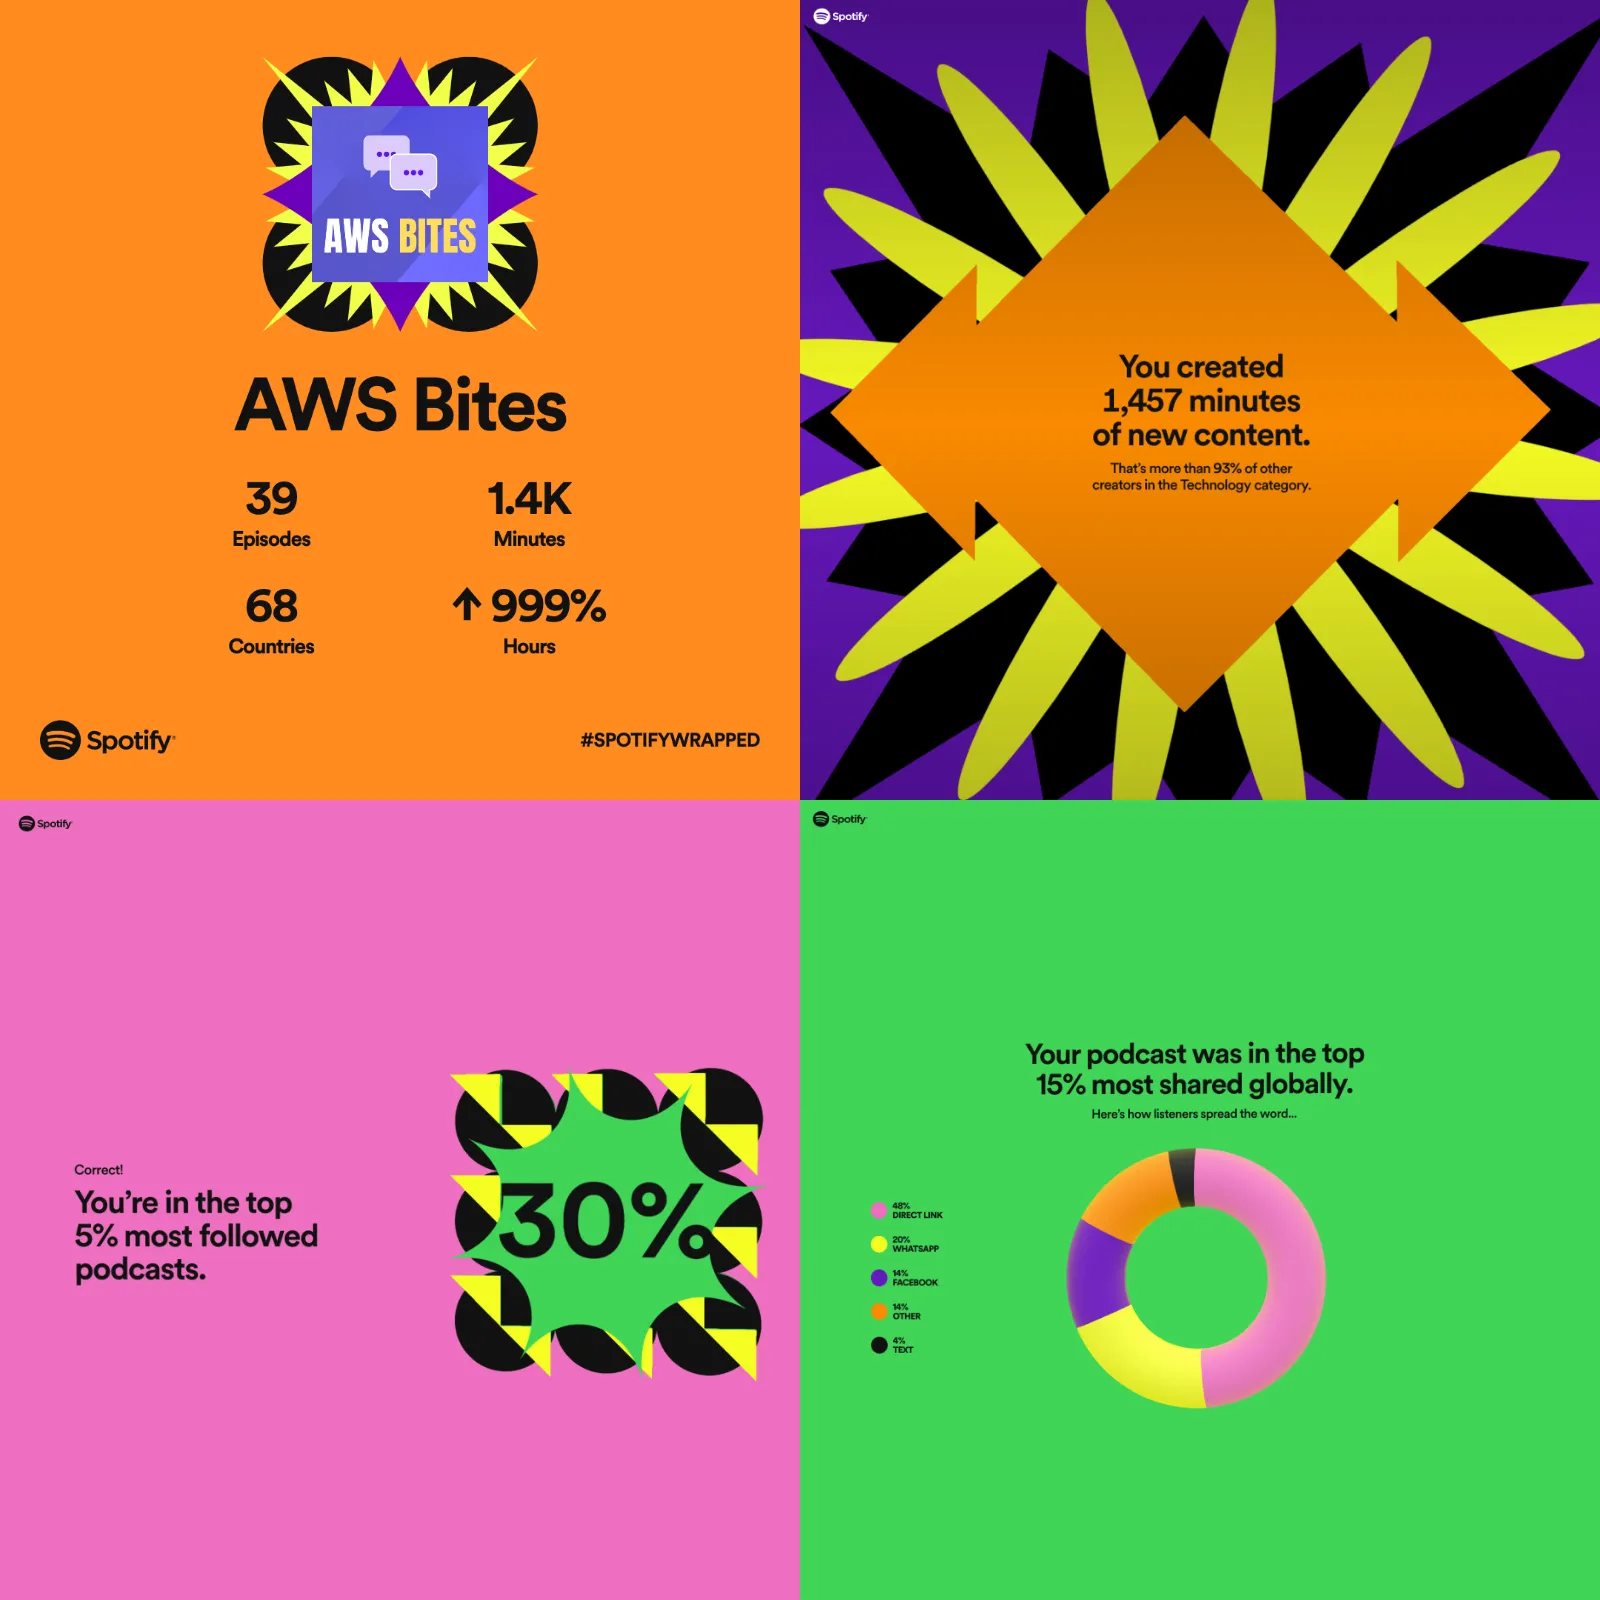 statistics from Spotify Wrapped 2022 for AWS Bites podcasts